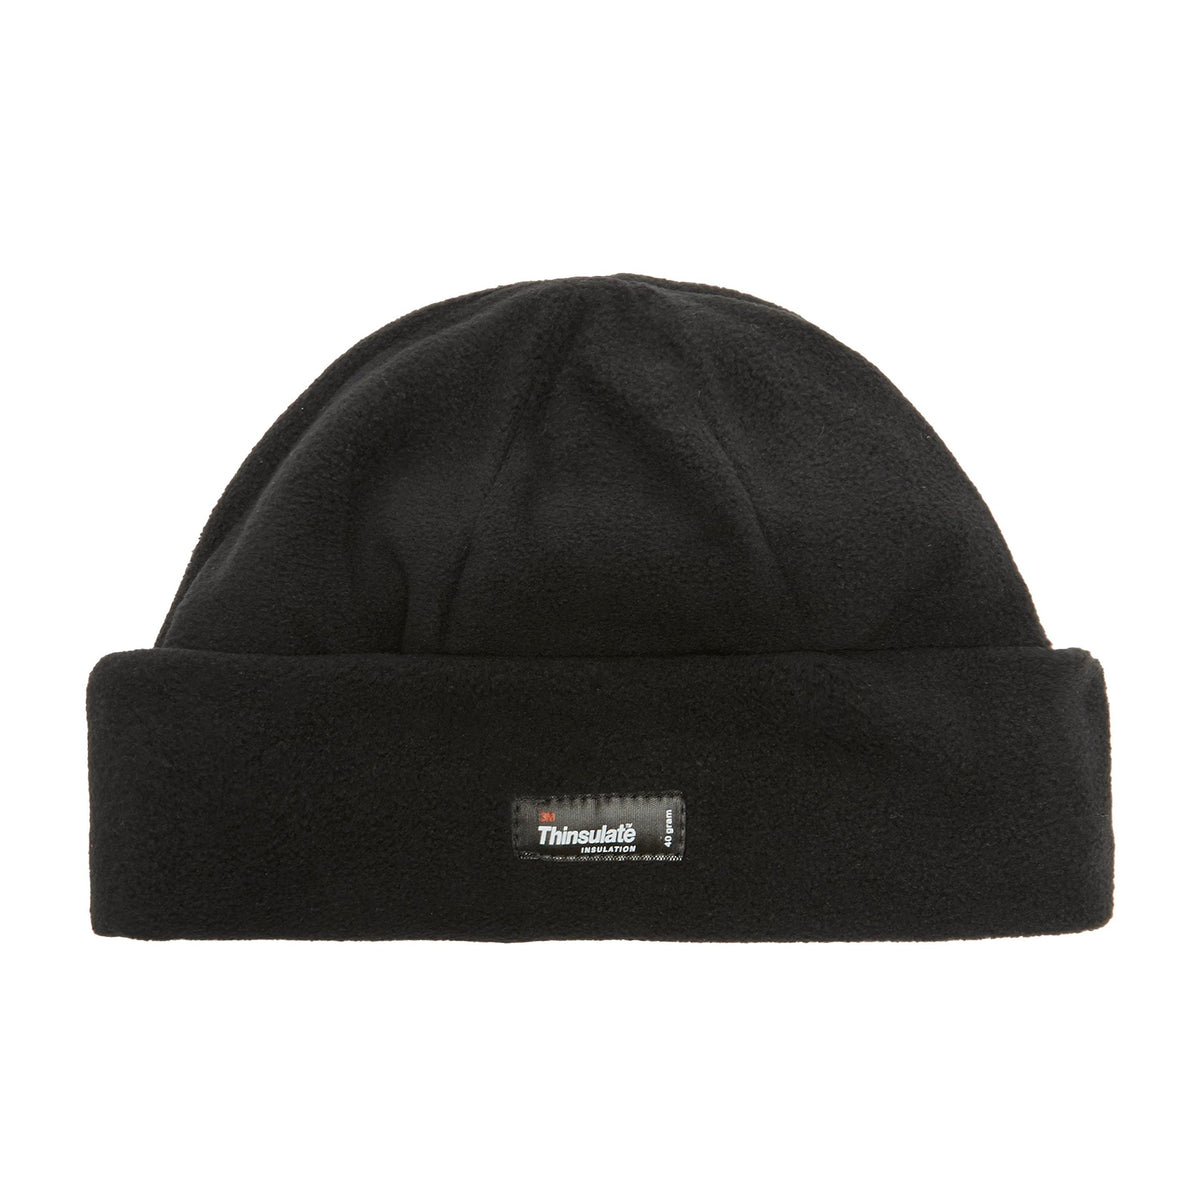 Peter Storm Warm and Breathable Unisex Thinsulate Fleece Beanie, Unisex Cold Weather Beanie Hat, Fleece Winter Hat for Men and Women, Winter Accessories, Black, One Size